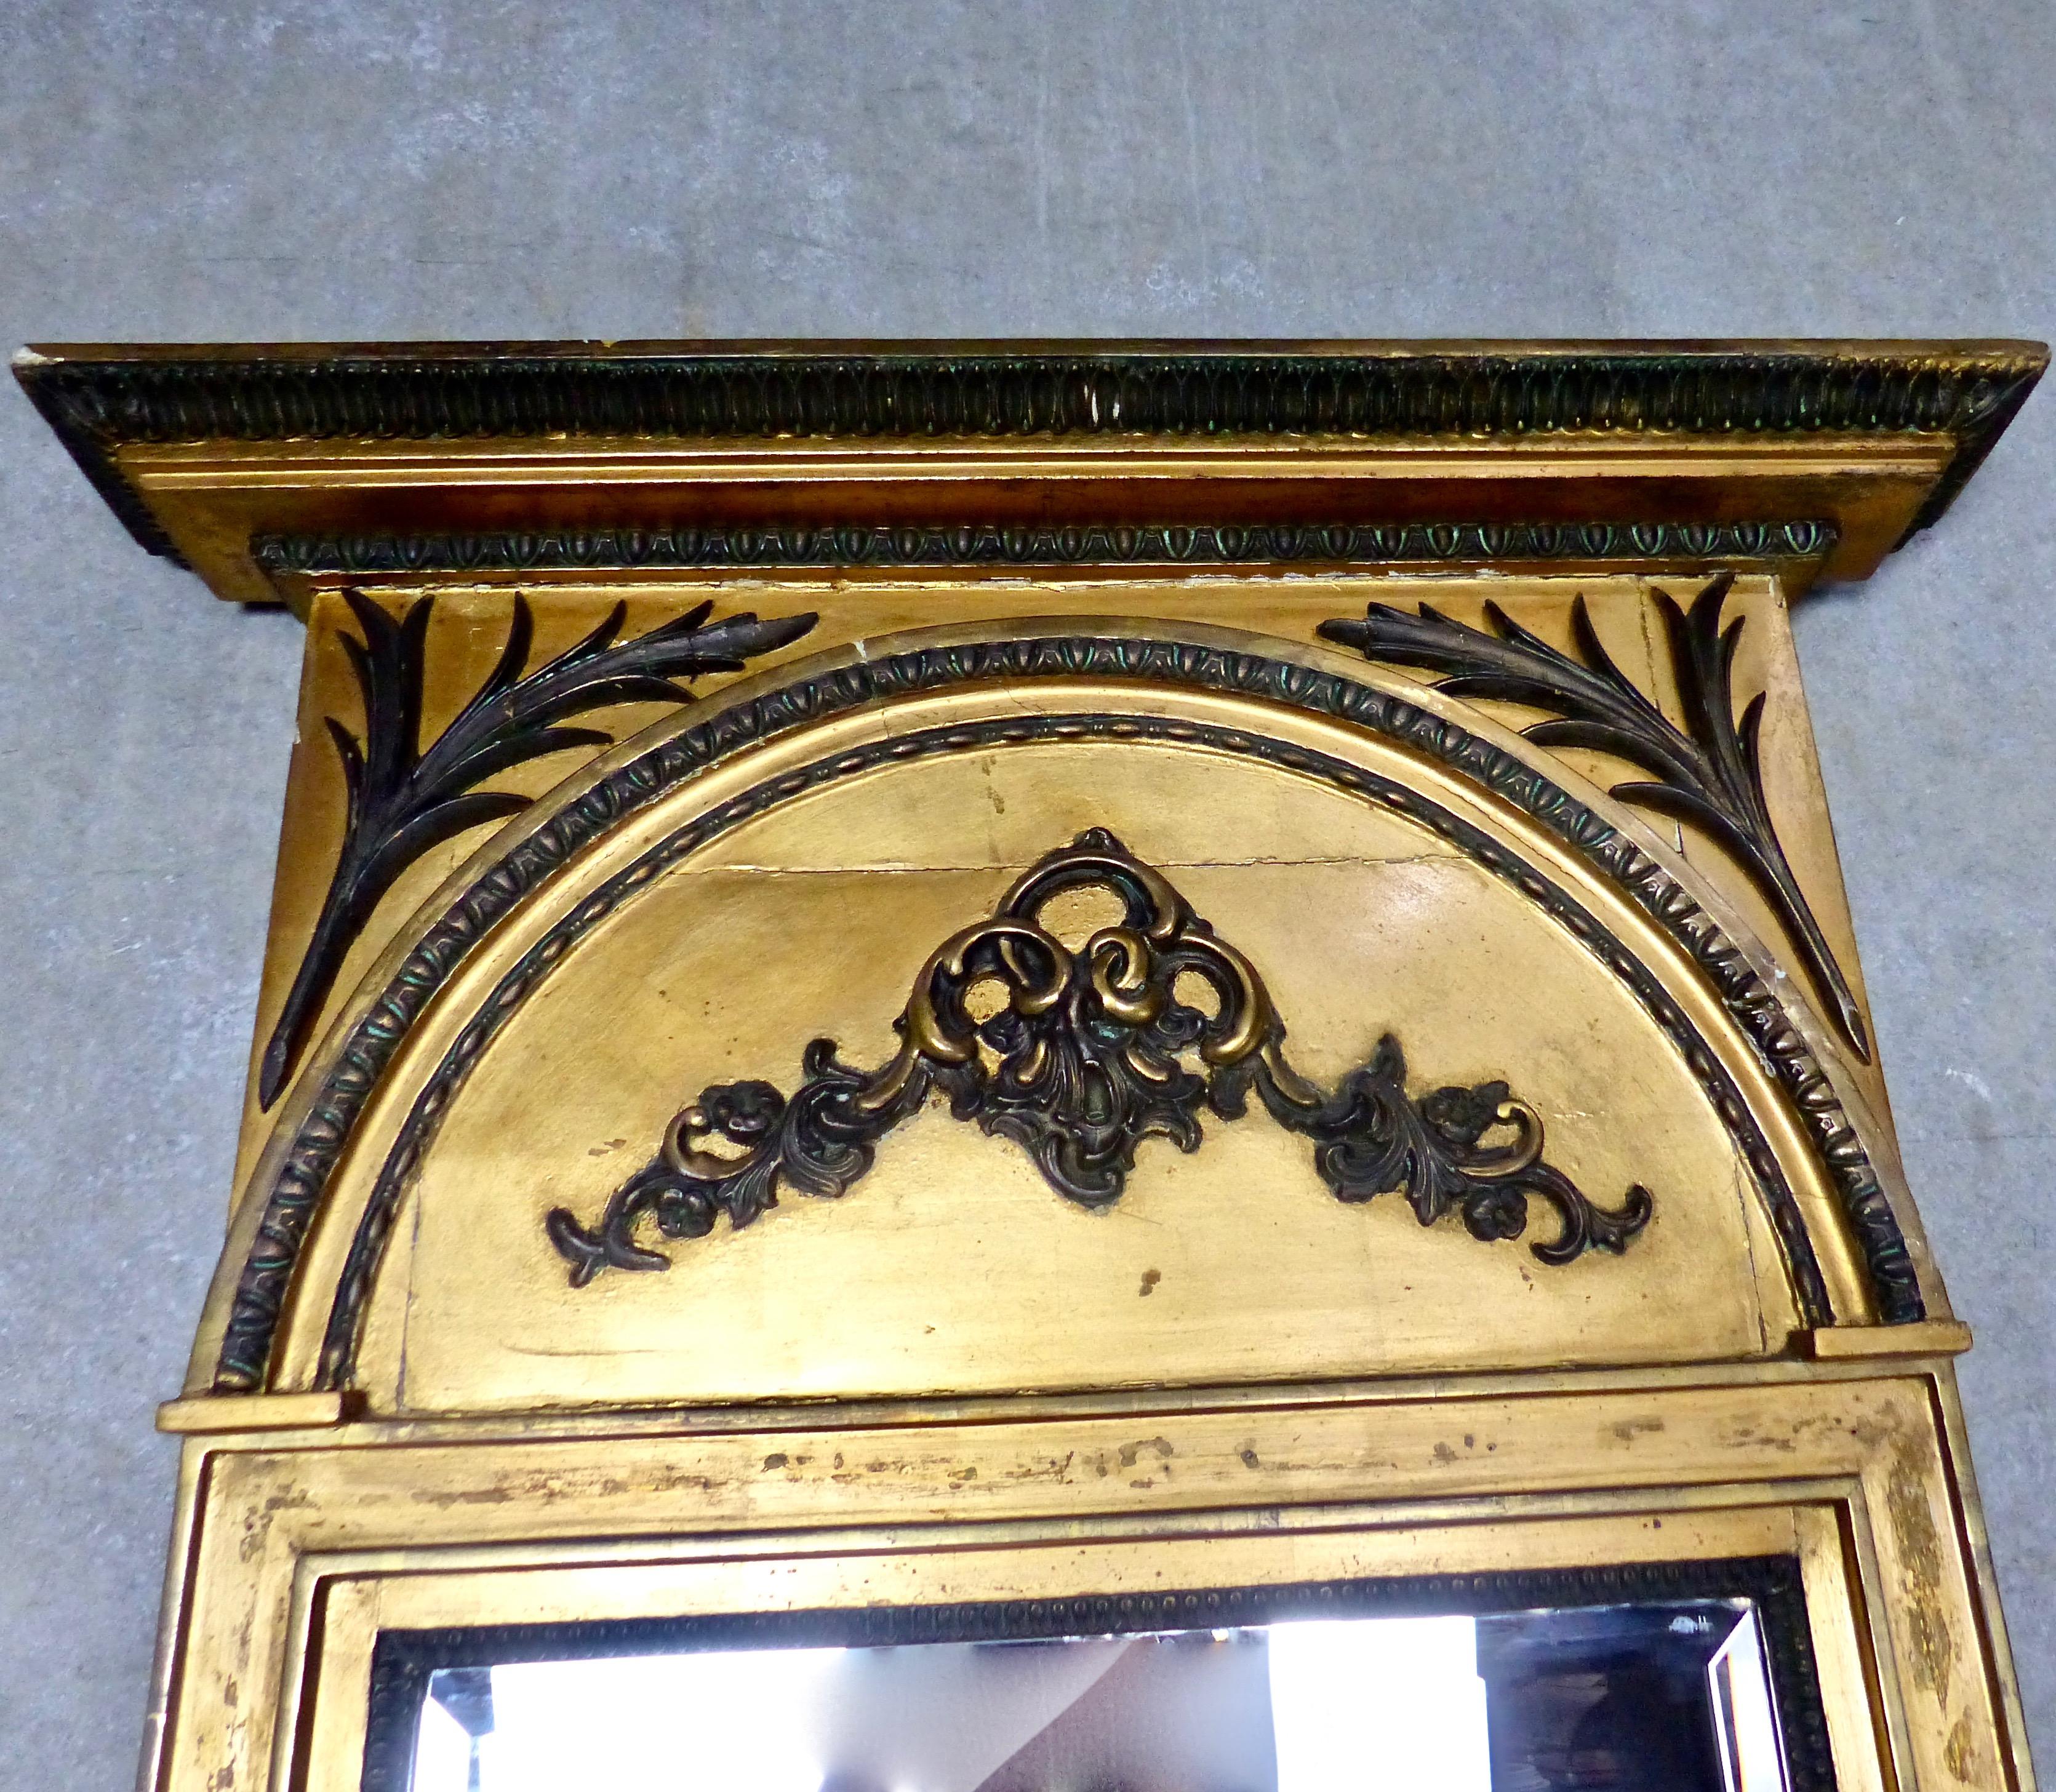 Well preserved giltwood mirror from circa 1860, Italy. Spectacular gold leaf coupled with contrasting cast iron applied details. Great size for hallway, mantel, or anywhere you need a hit of color and sparkle.
Dimensions: 60” H x 25” W x 2” D.